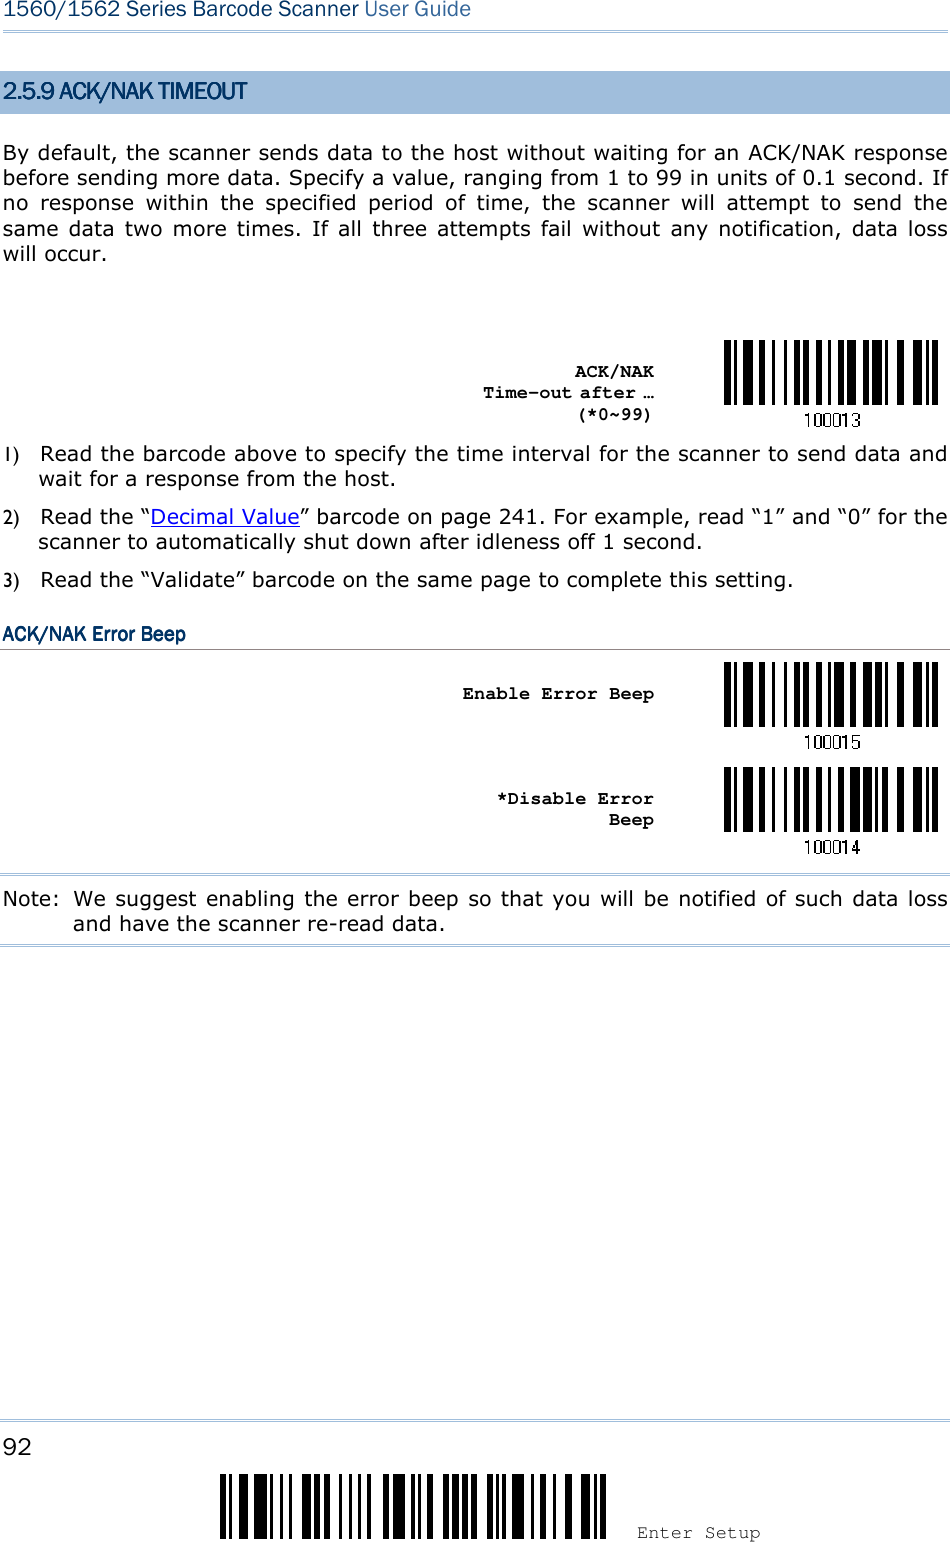 92 Enter Setup 1560/1562 Series Barcode Scanner User Guide  2.2.2.2.5555.9 .9 .9 .9 ACK/NAK TIMEOUTACK/NAK TIMEOUTACK/NAK TIMEOUTACK/NAK TIMEOUT    By default, the scanner sends data to the host without waiting for an ACK/NAK response before sending more data. Specify a value, ranging from 1 to 99 in units of 0.1 second. If no  response  within  the  specified  period  of  time,  the  scanner  will  attempt  to  send  the same  data  two  more  times.  If  all  three attempts  fail  without  any  notification,  data loss will occur.     ACK/NAK Time-out after … (*0~99)  1) Read the barcode above to specify the time interval for the scanner to send data and wait for a response from the host. 2) Read the “Decimal Value” barcode on page 241. For example, read “1” and “0” for the scanner to automatically shut down after idleness off 1 second. 3) Read the “Validate” barcode on the same page to complete this setting. ACK/NAK Error BeepACK/NAK Error BeepACK/NAK Error BeepACK/NAK Error Beep       Enable Error Beep     *Disable Error Beep  Note:  We suggest enabling the error beep so that you will be notified of such data loss and have the scanner re-read data.   